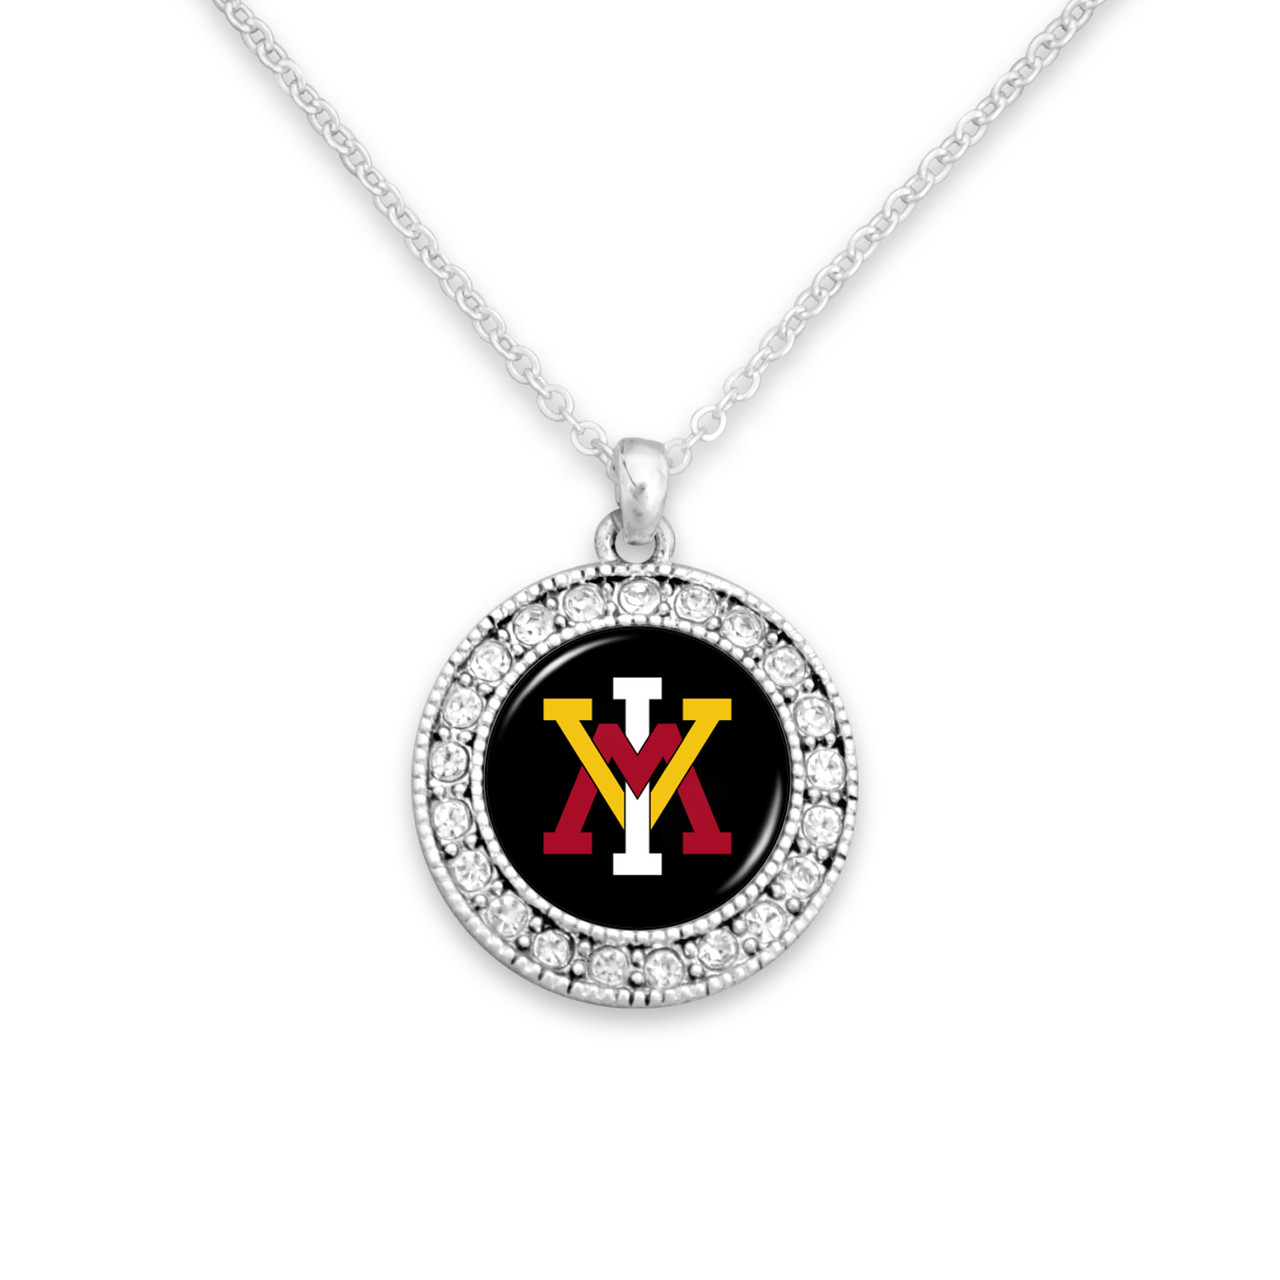 Virginia Military Keydets Necklace- Kenzie